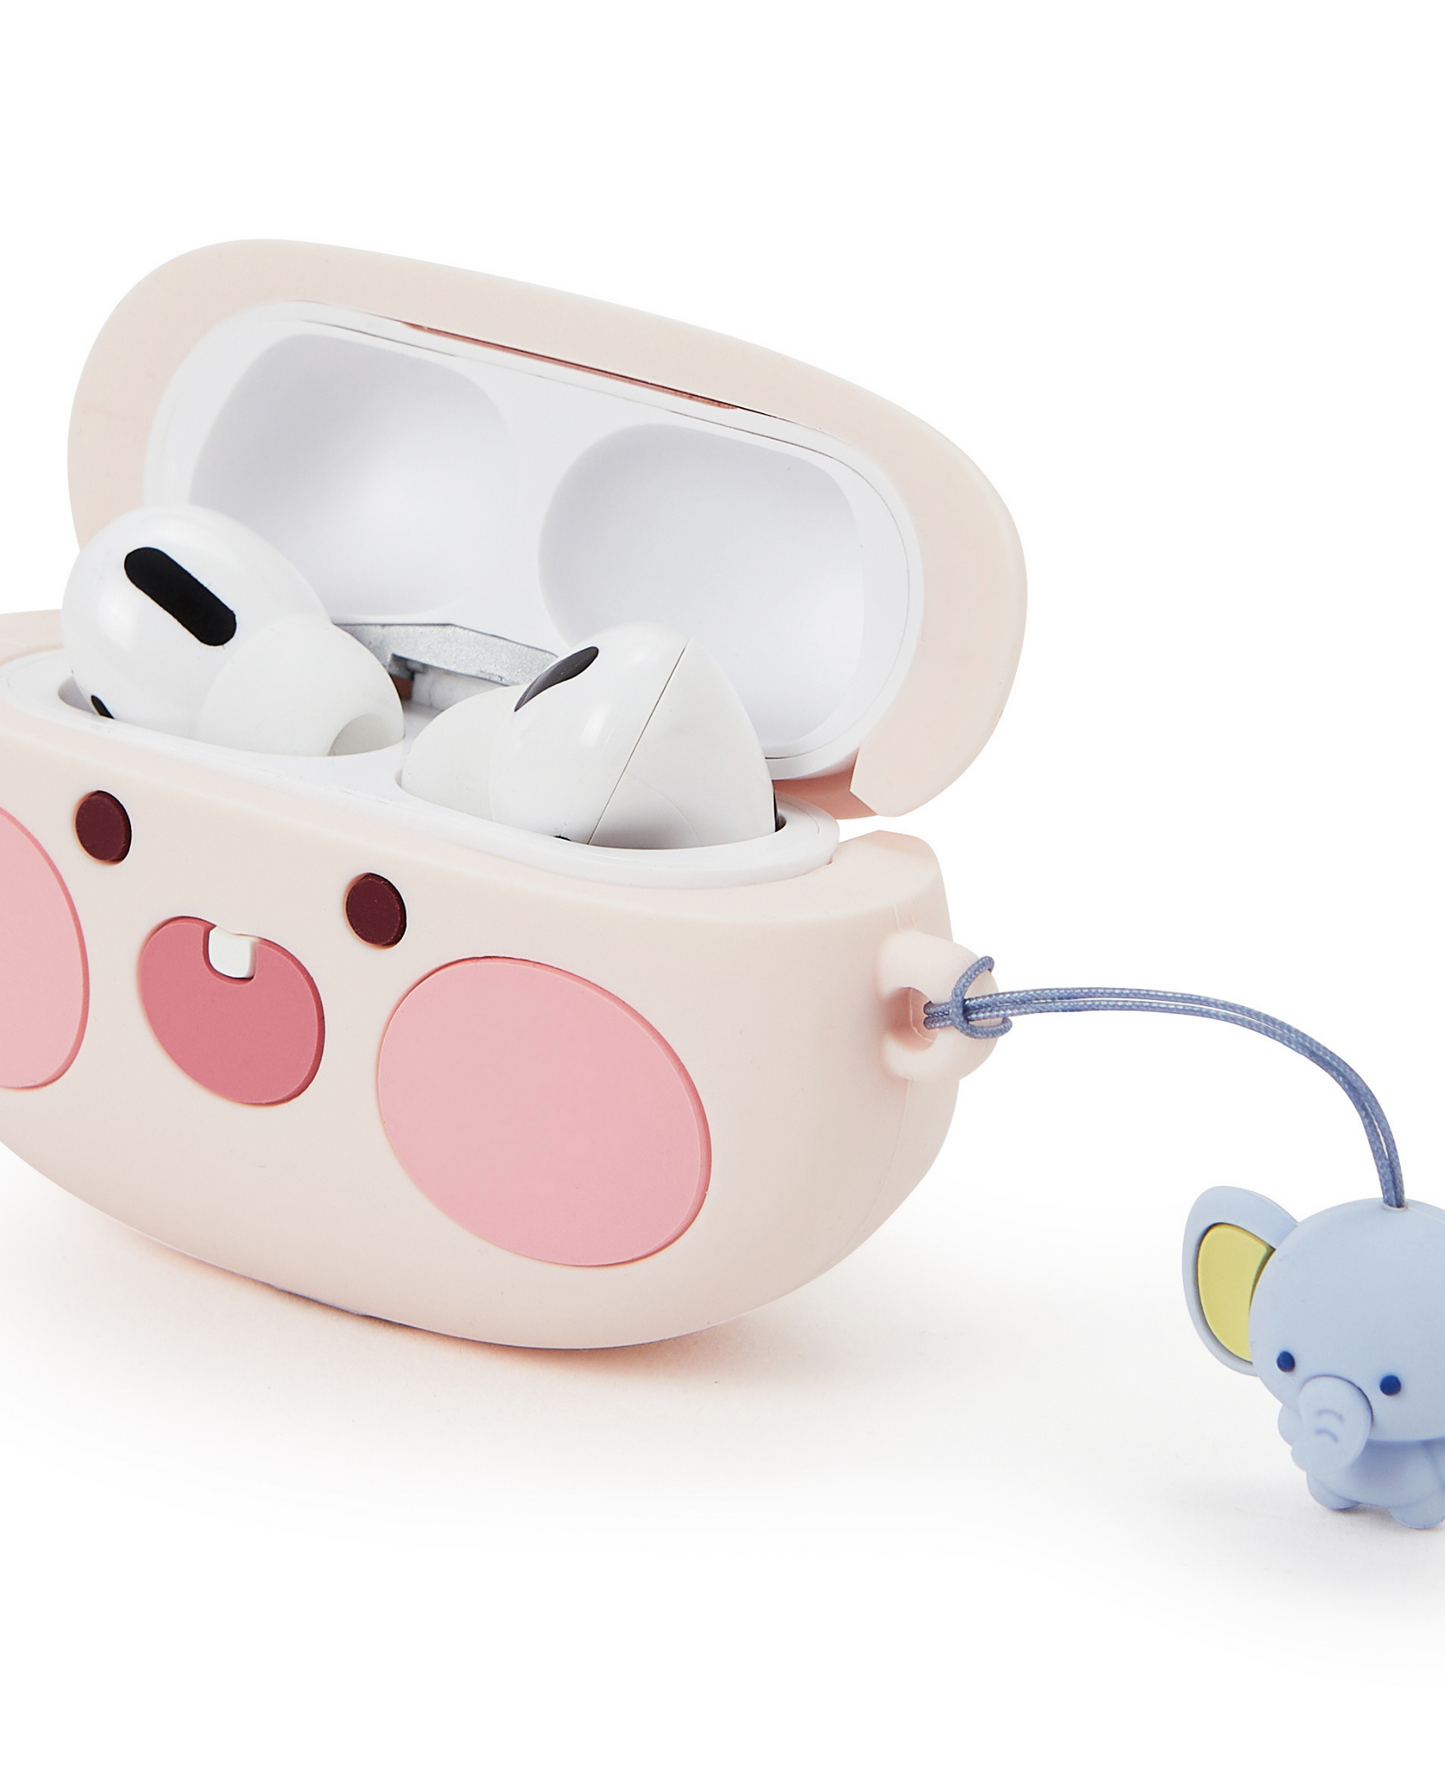 Apeach Baby Dreaming Airpods Pro 2 Case Kakao Friends